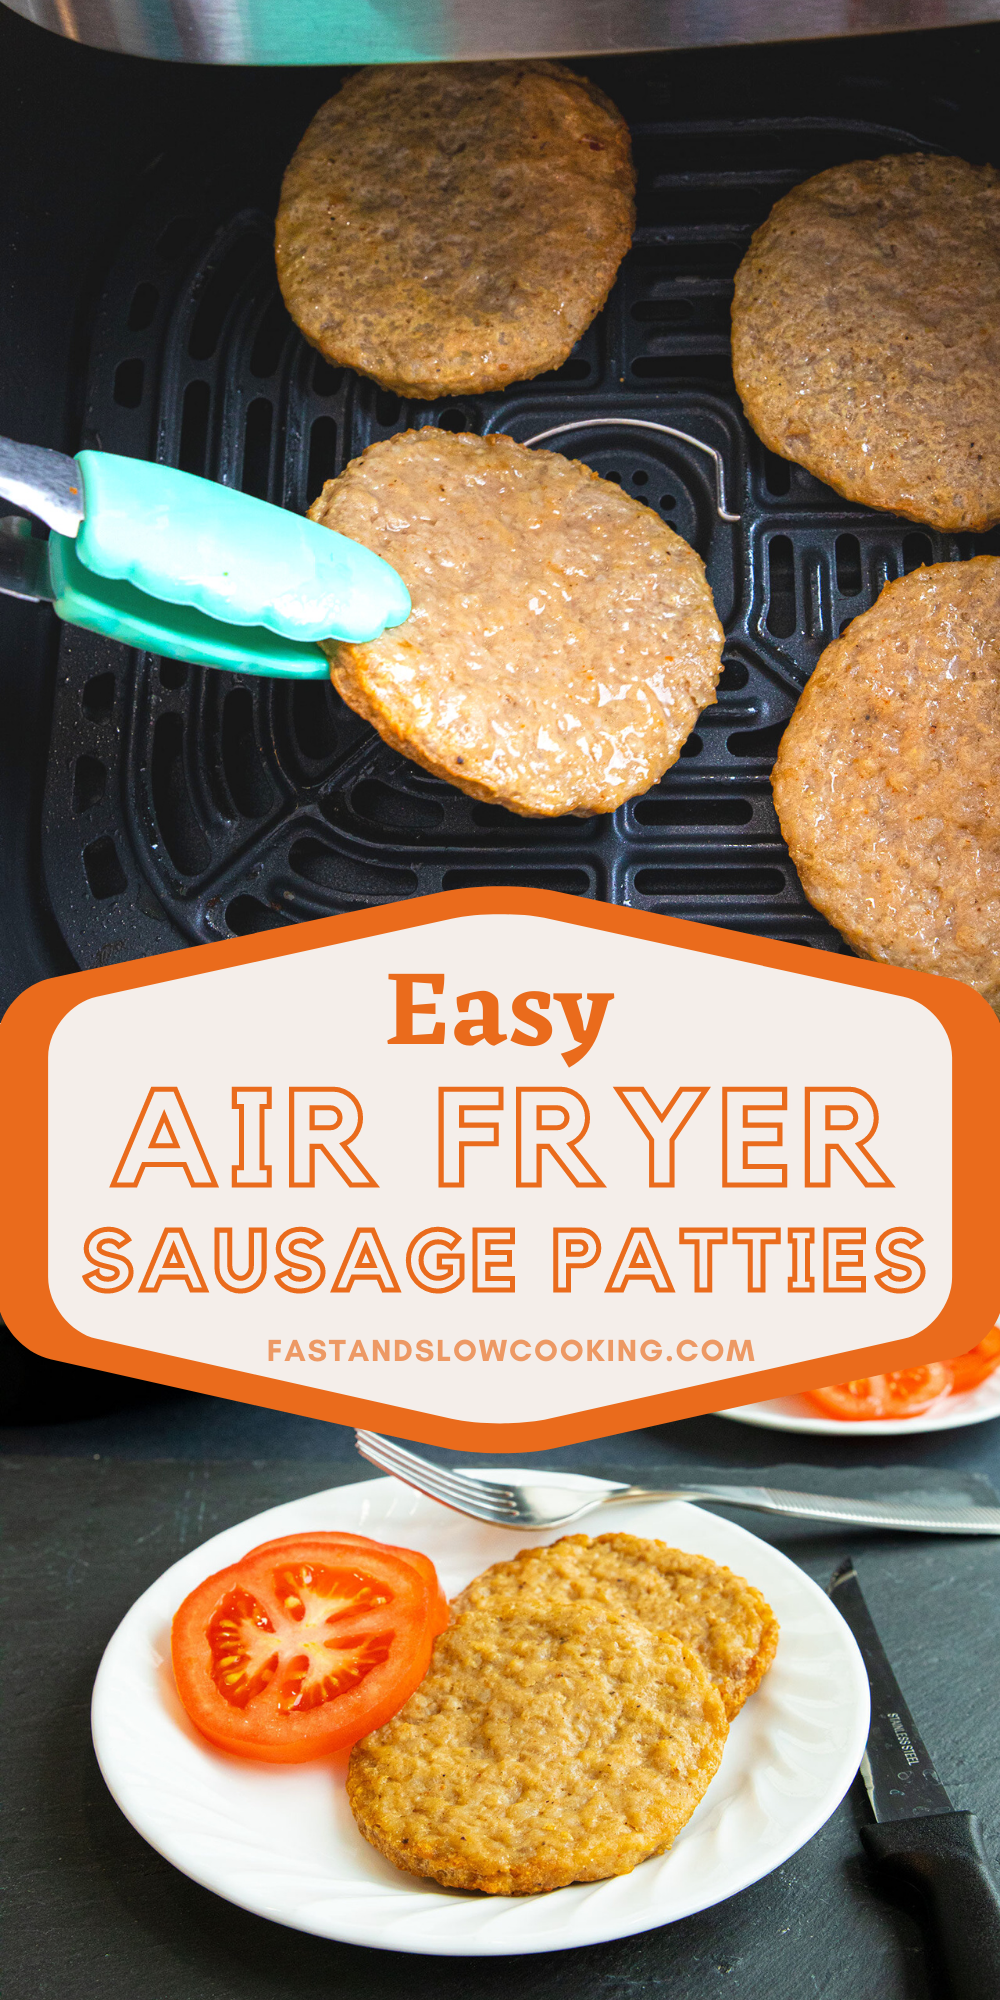 Need a quick breakfast option without using the frying pan? Why not try some air fryer sausage patties and make your breakfast easier?